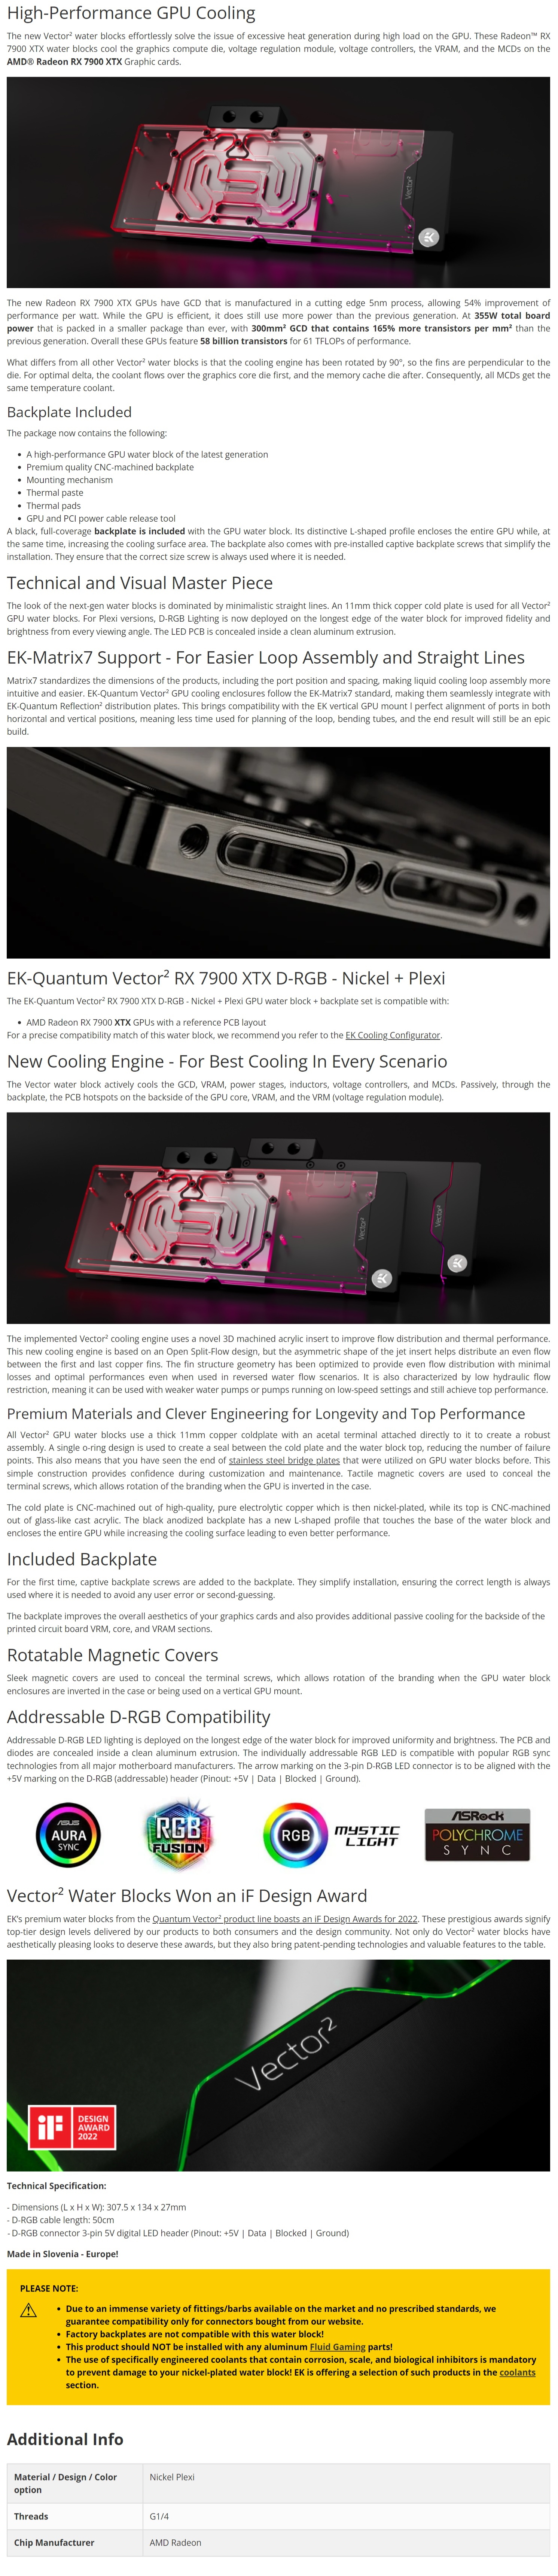 A large marketing image providing additional information about the product EK Quantum Vector2 RX 7900 XTX D-RGB Nickel+Plexi  - Additional alt info not provided